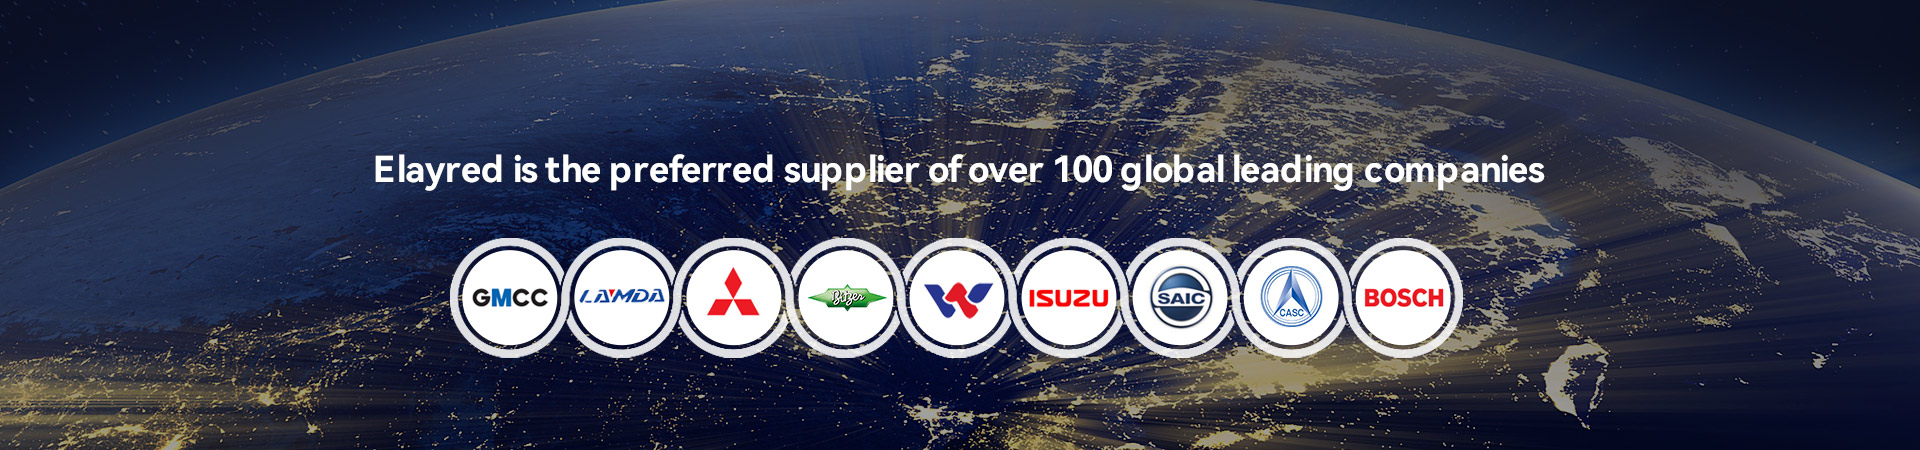 Elayred is the preferred supplier of over 100 global leading companies